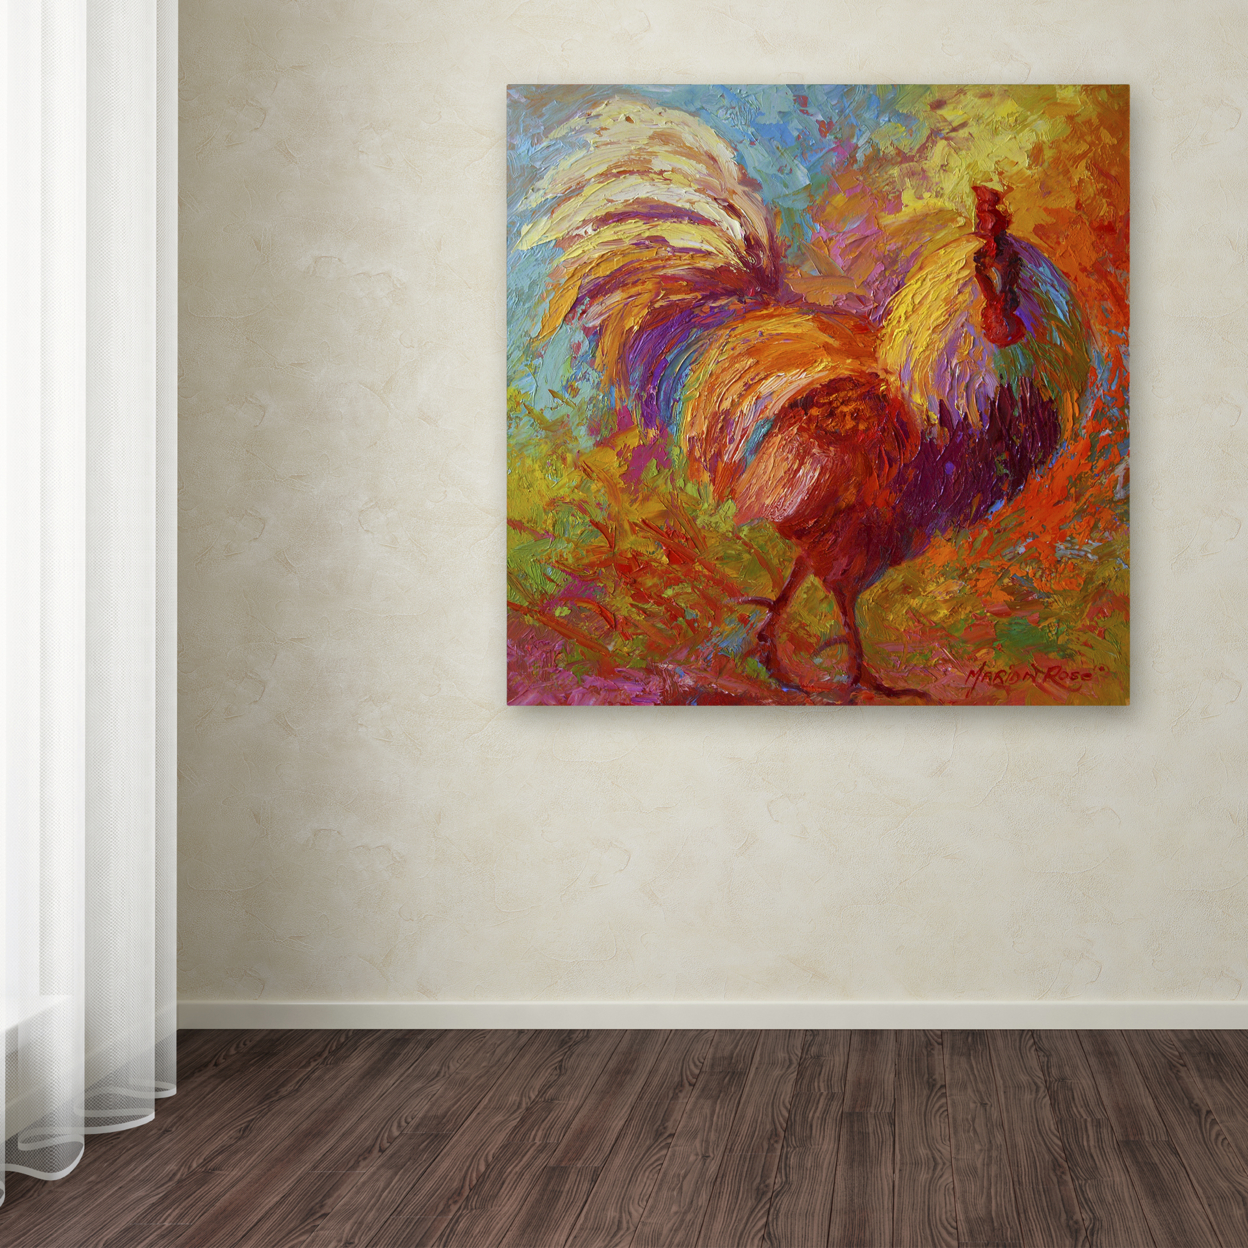 Marion Rose 'Rooster 6' Ready To Hang Canvas Art 24 X 24 Inches Made In USA